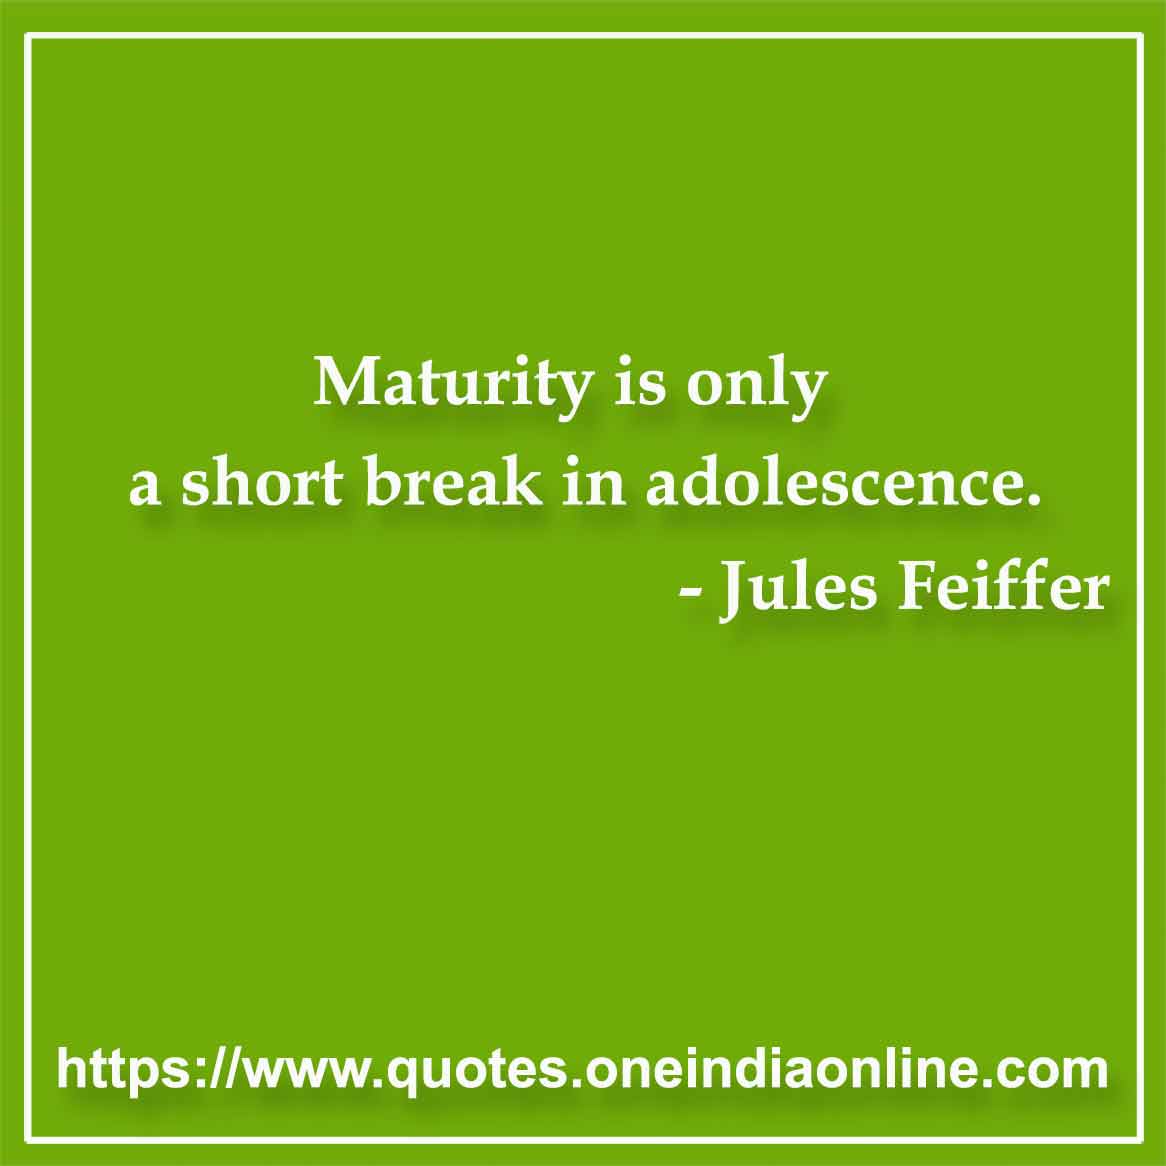 Maturity is only a short break in adolescence. 

- Maturity Quotes by Jules Feiffer 